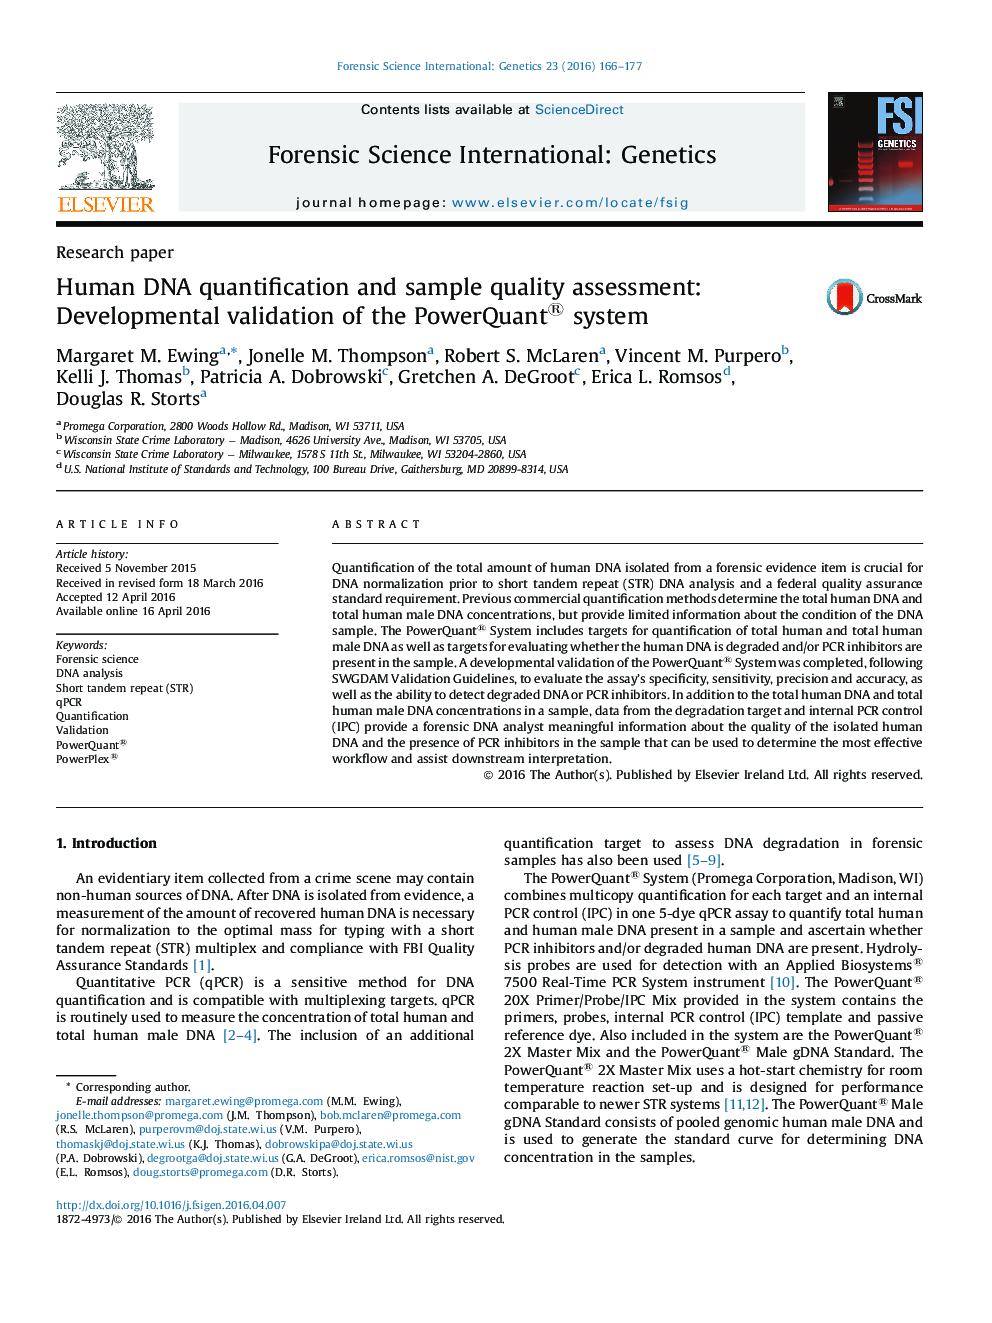 Human DNA quantification and sample quality assessment: Developmental validation of the PowerQuantÂ¨r) system